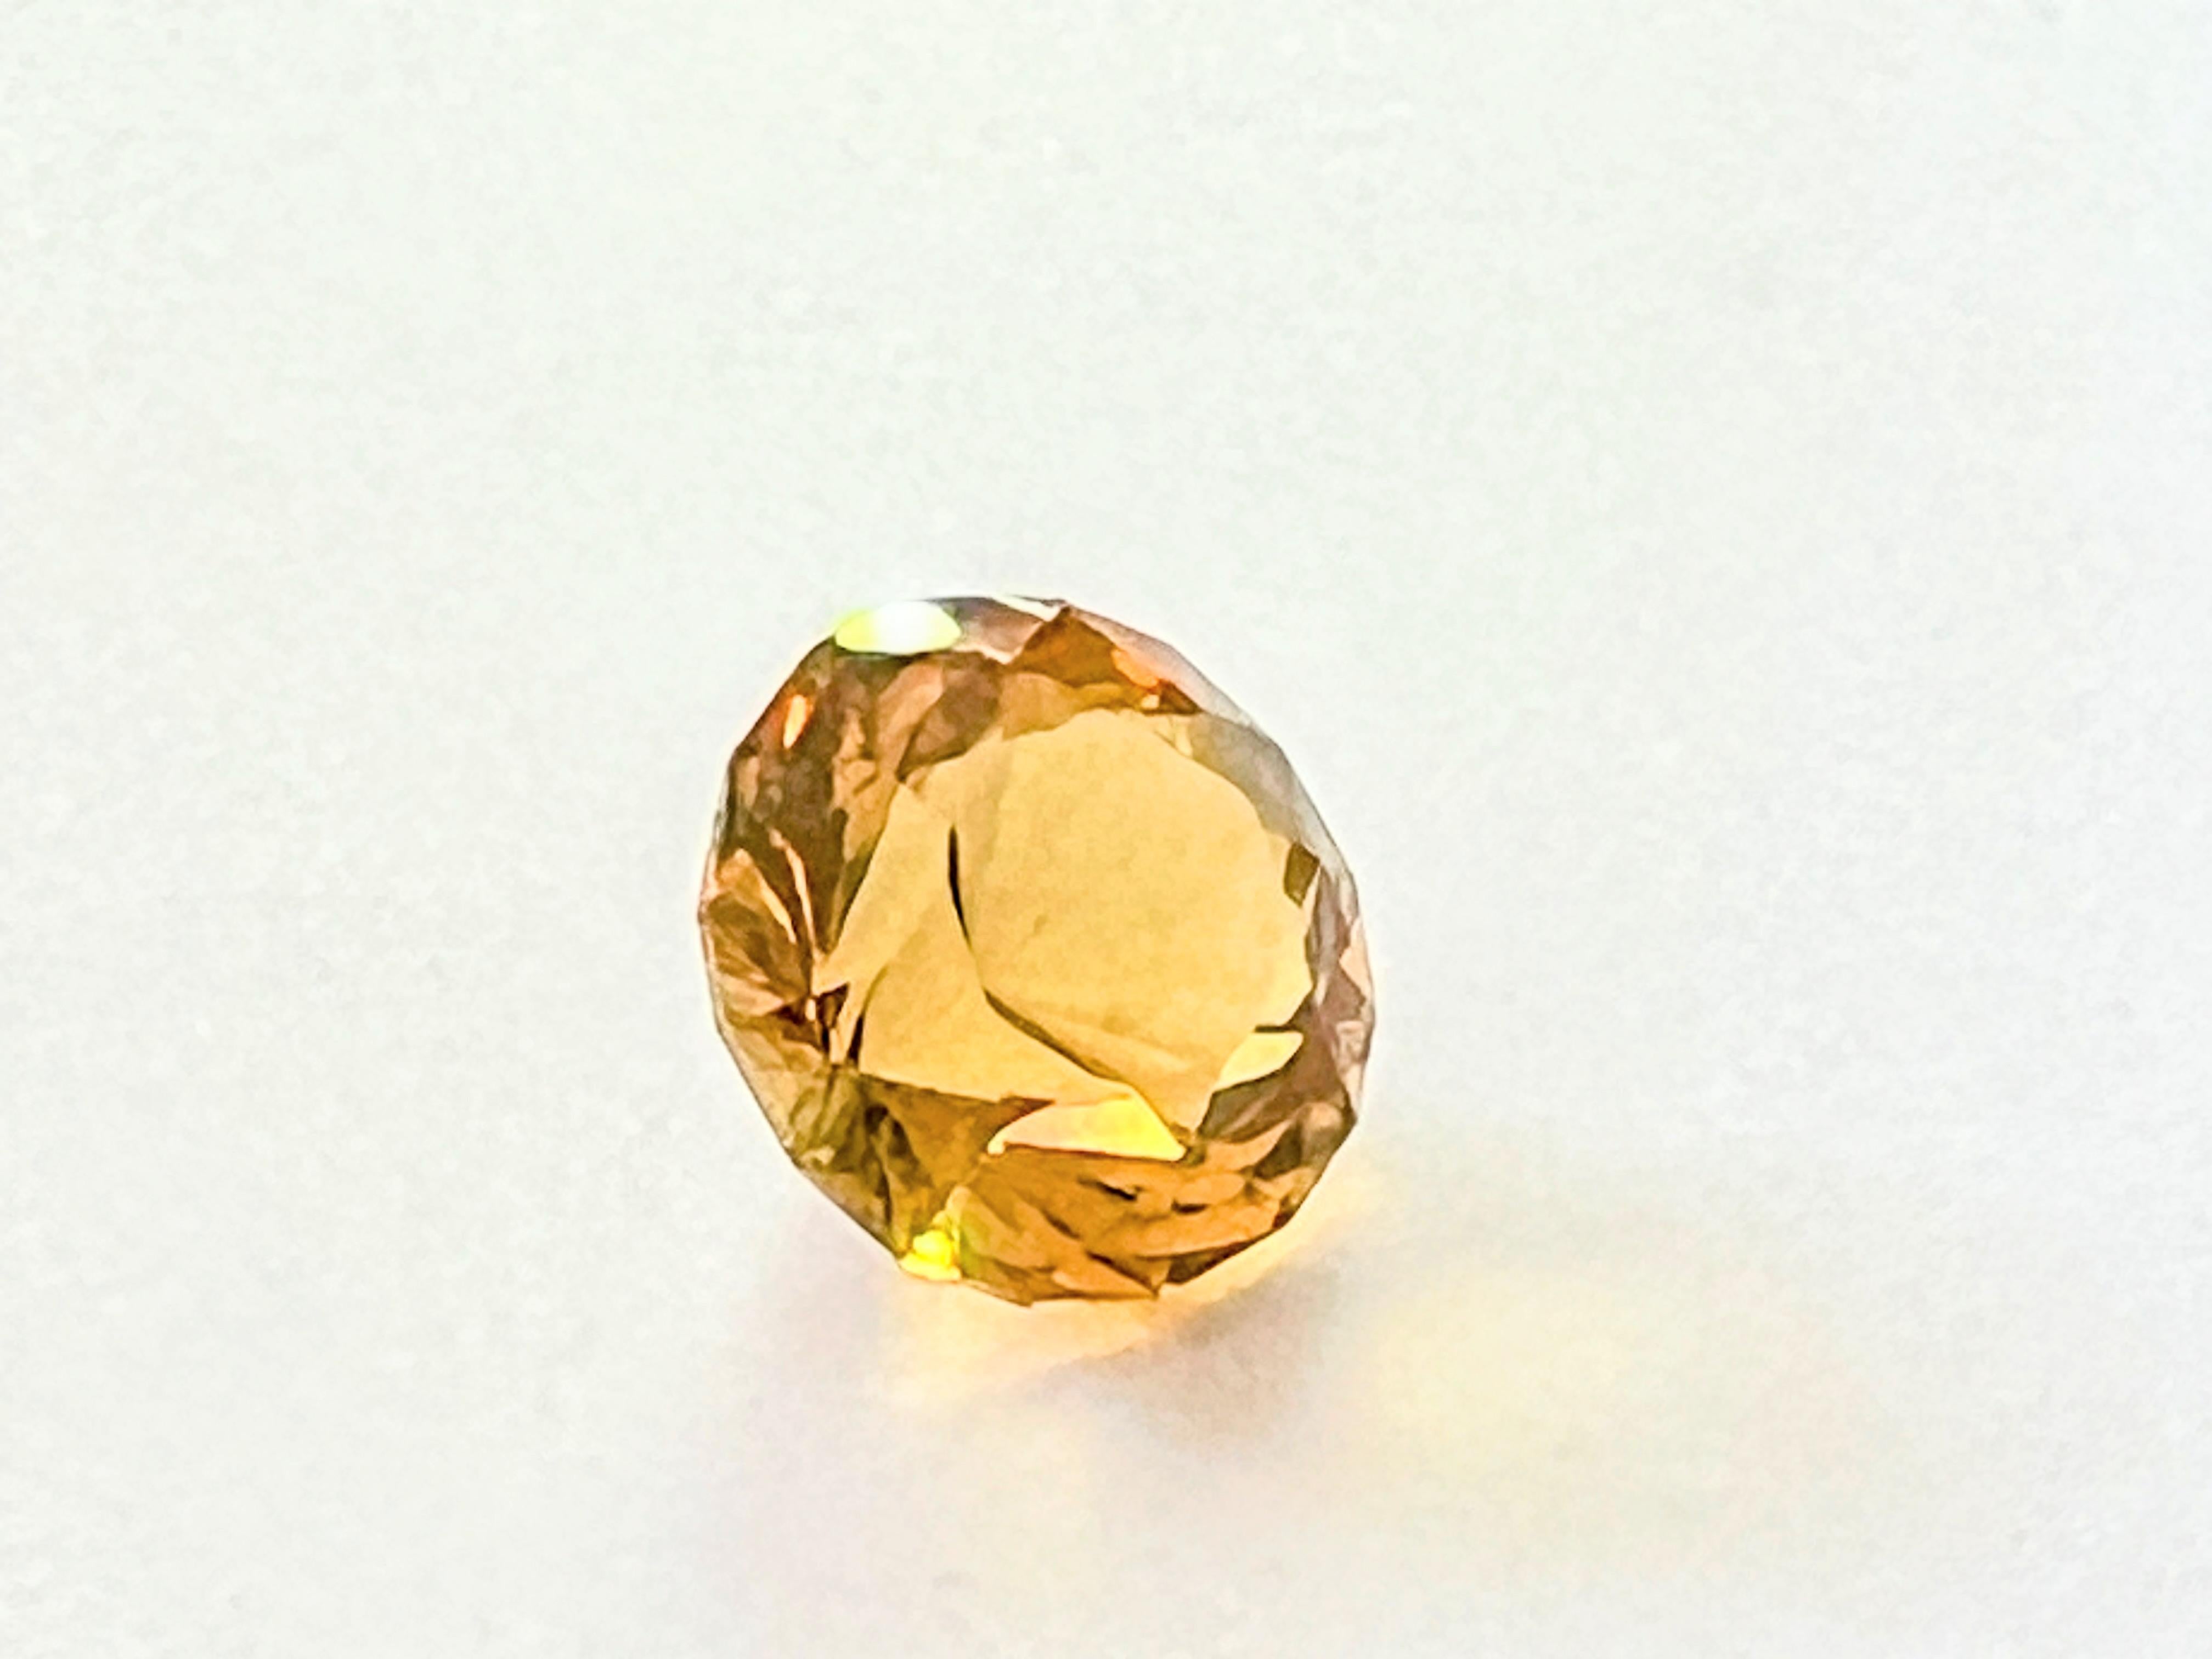 Introducing our loupe clean natural 9.5ct Round Cut Yellow Citrine—a gemstone that captures the warmth and radiance of the sun itself. This exquisite citrine, with its brilliant yellow hue, is presented in a classic round cut, allowing its natural